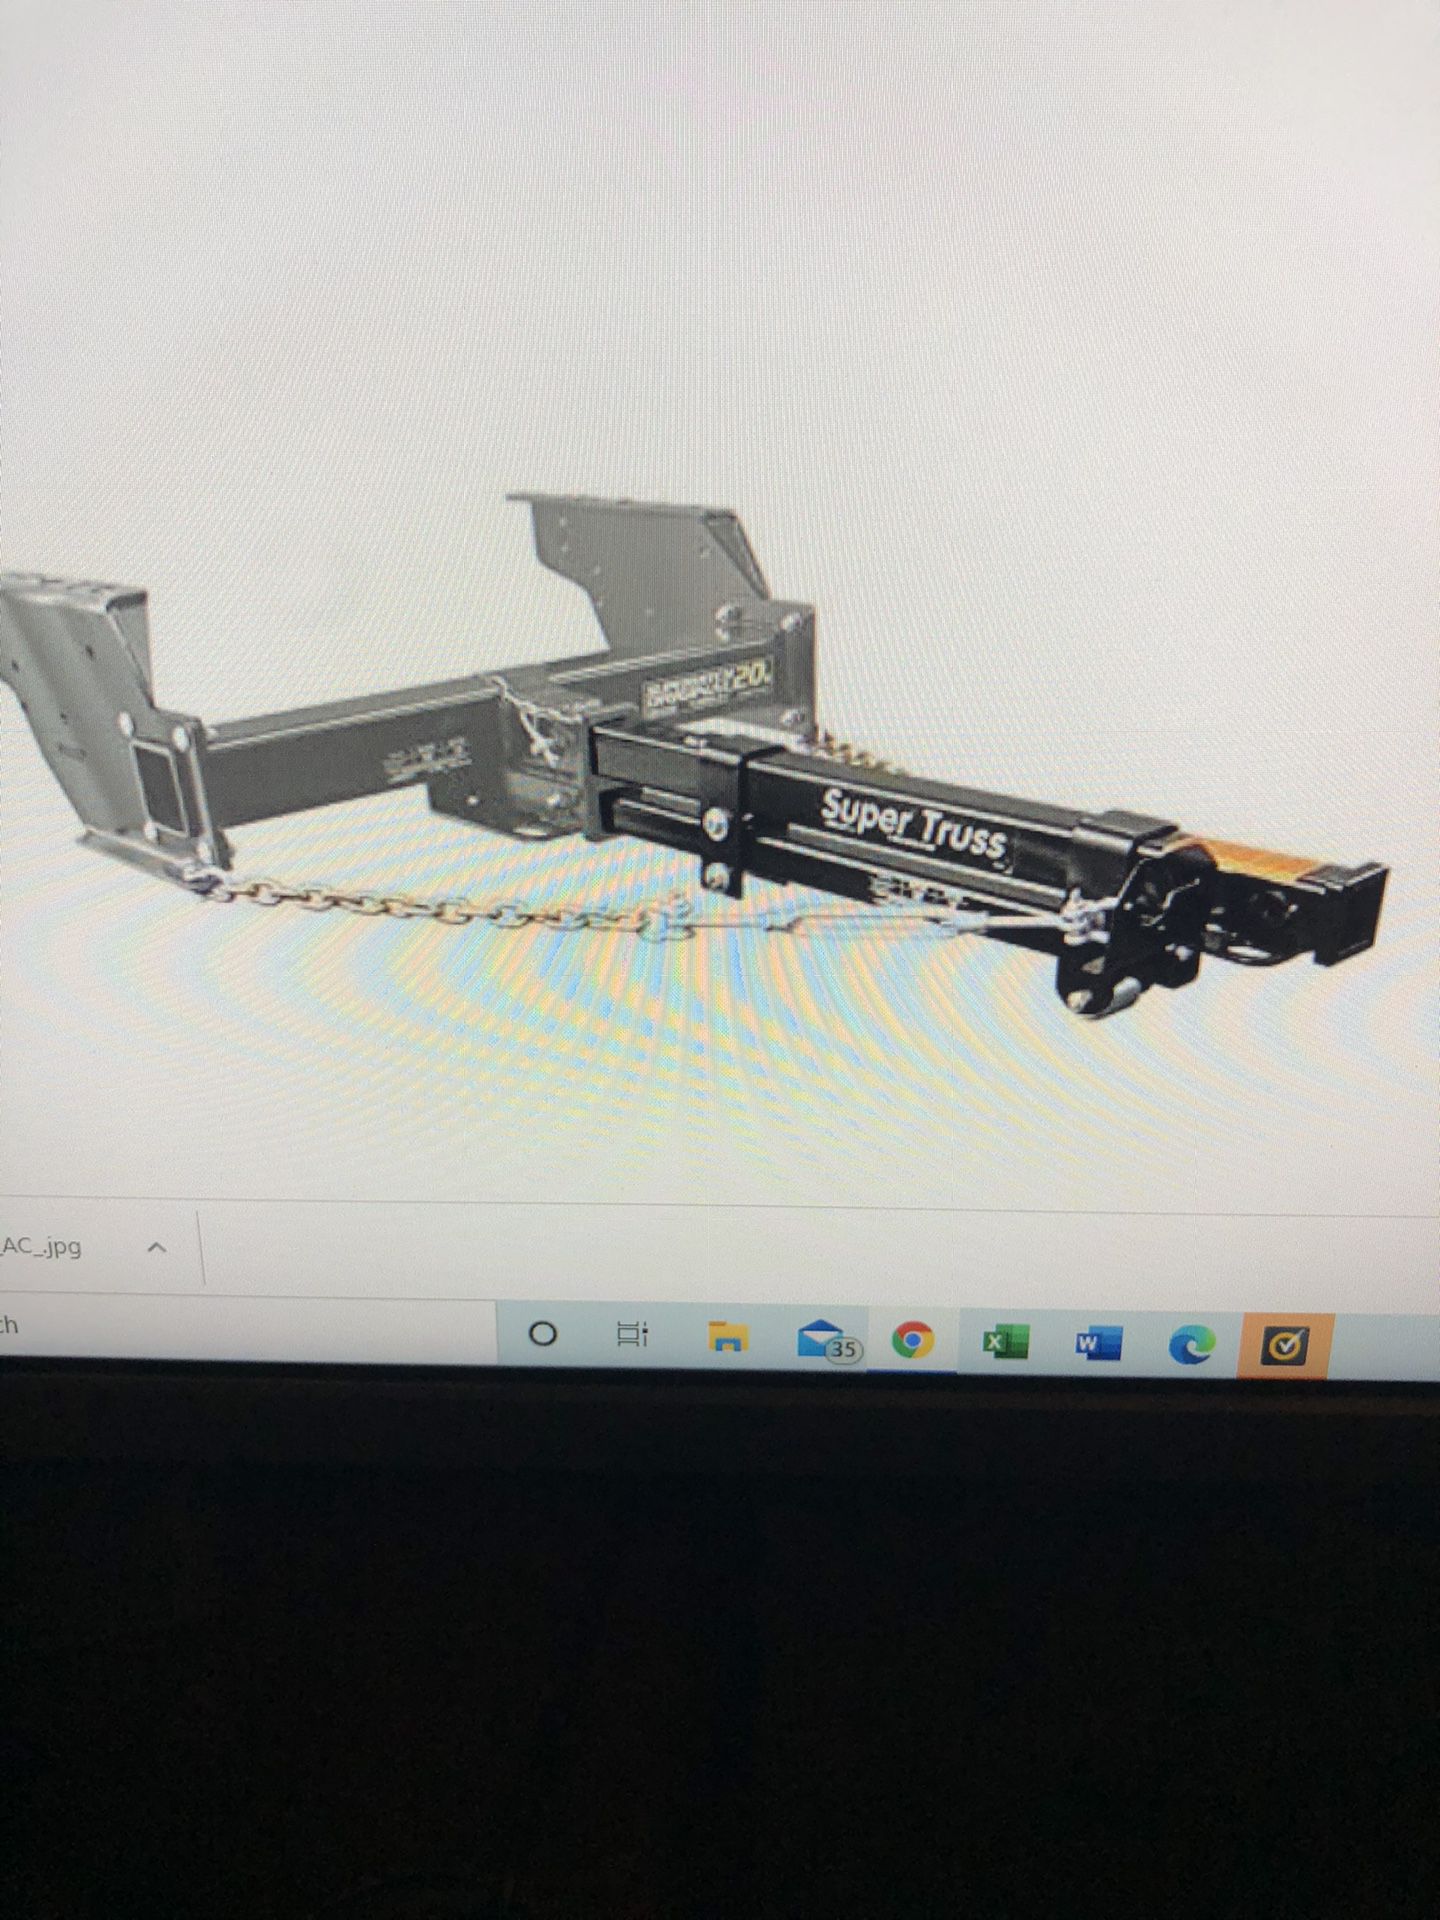 Totklift 48” Super Truss Hitch Extension